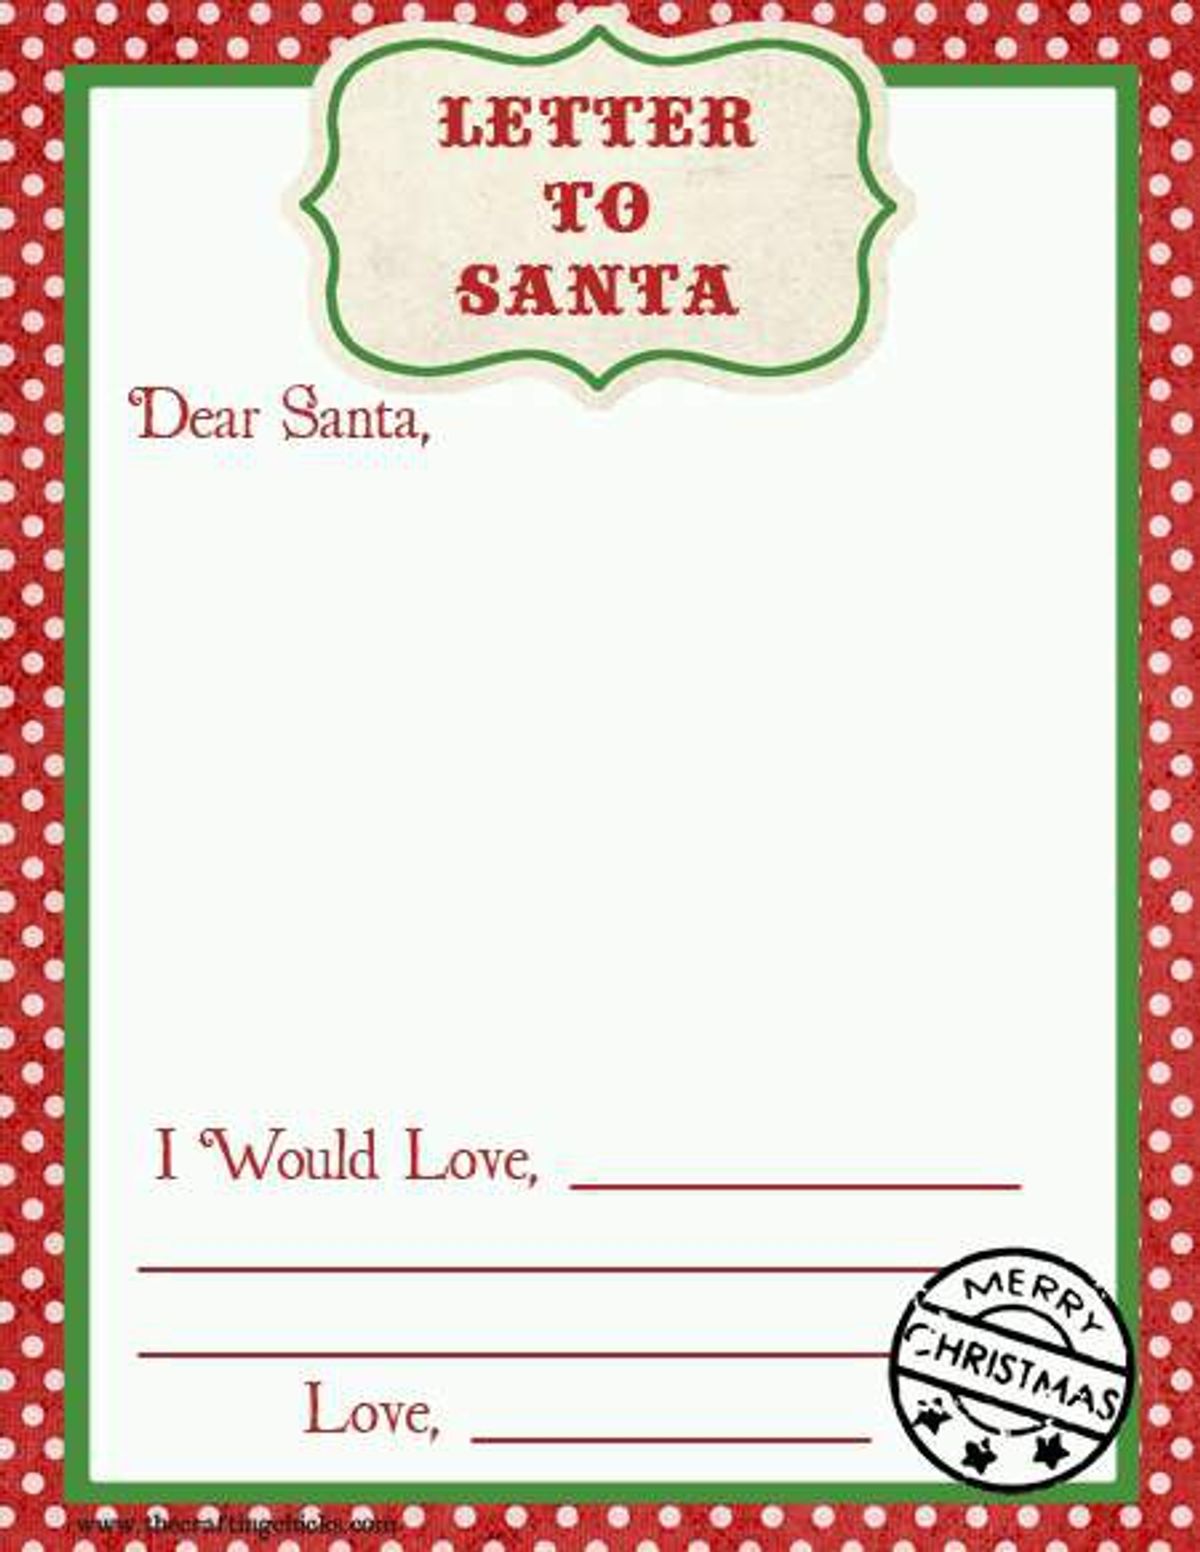 A Letter to Santa For Christmas In July